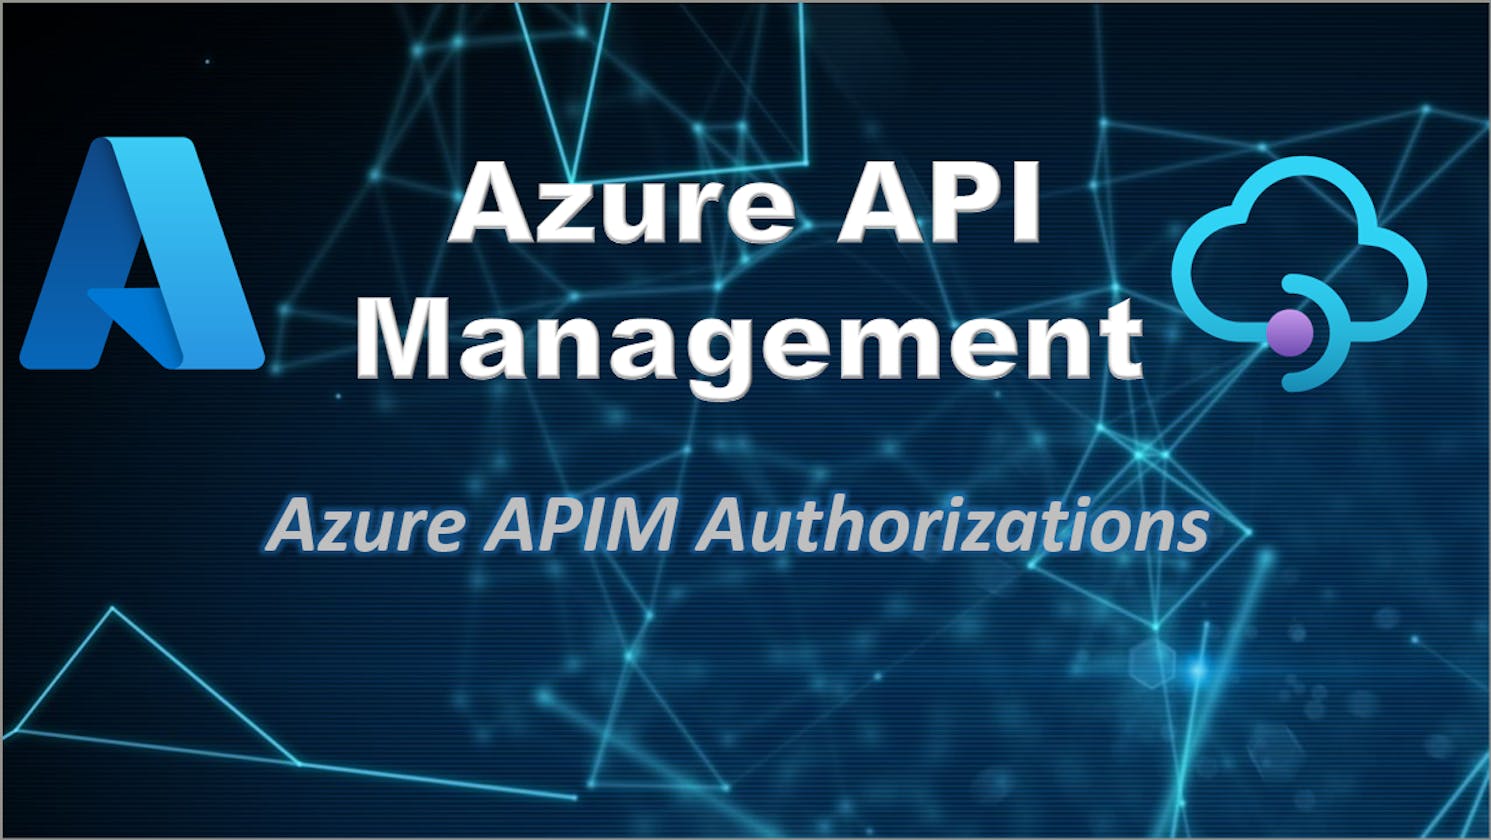 Azure APIM authorizations- configure Azure Active Directory as identity provider and fetch token dynamically in APIM policy